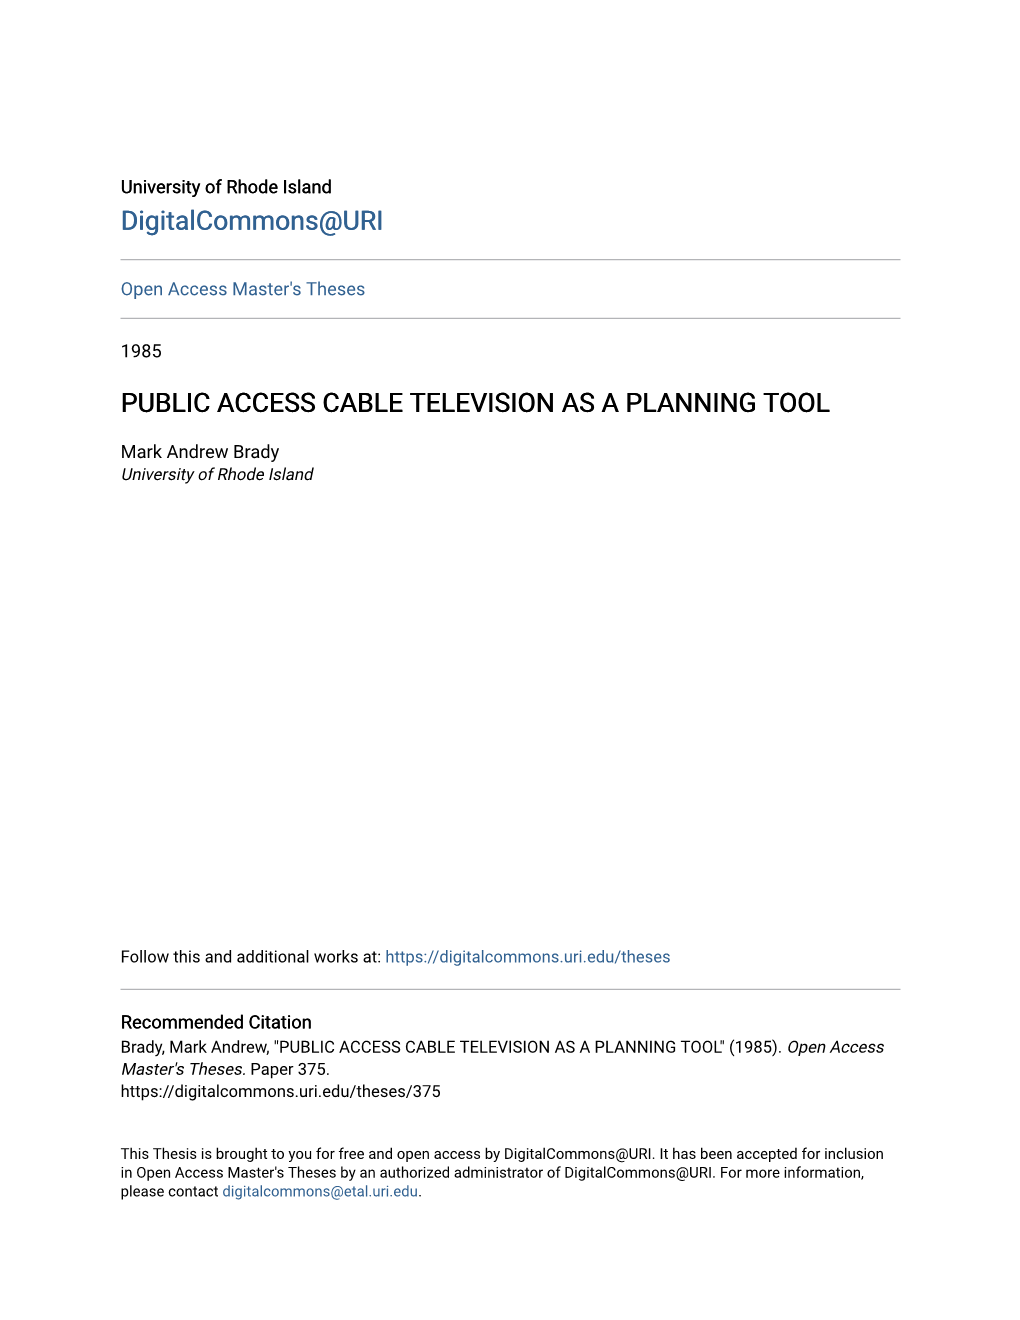 Public Access Cable Television As a Planning Tool